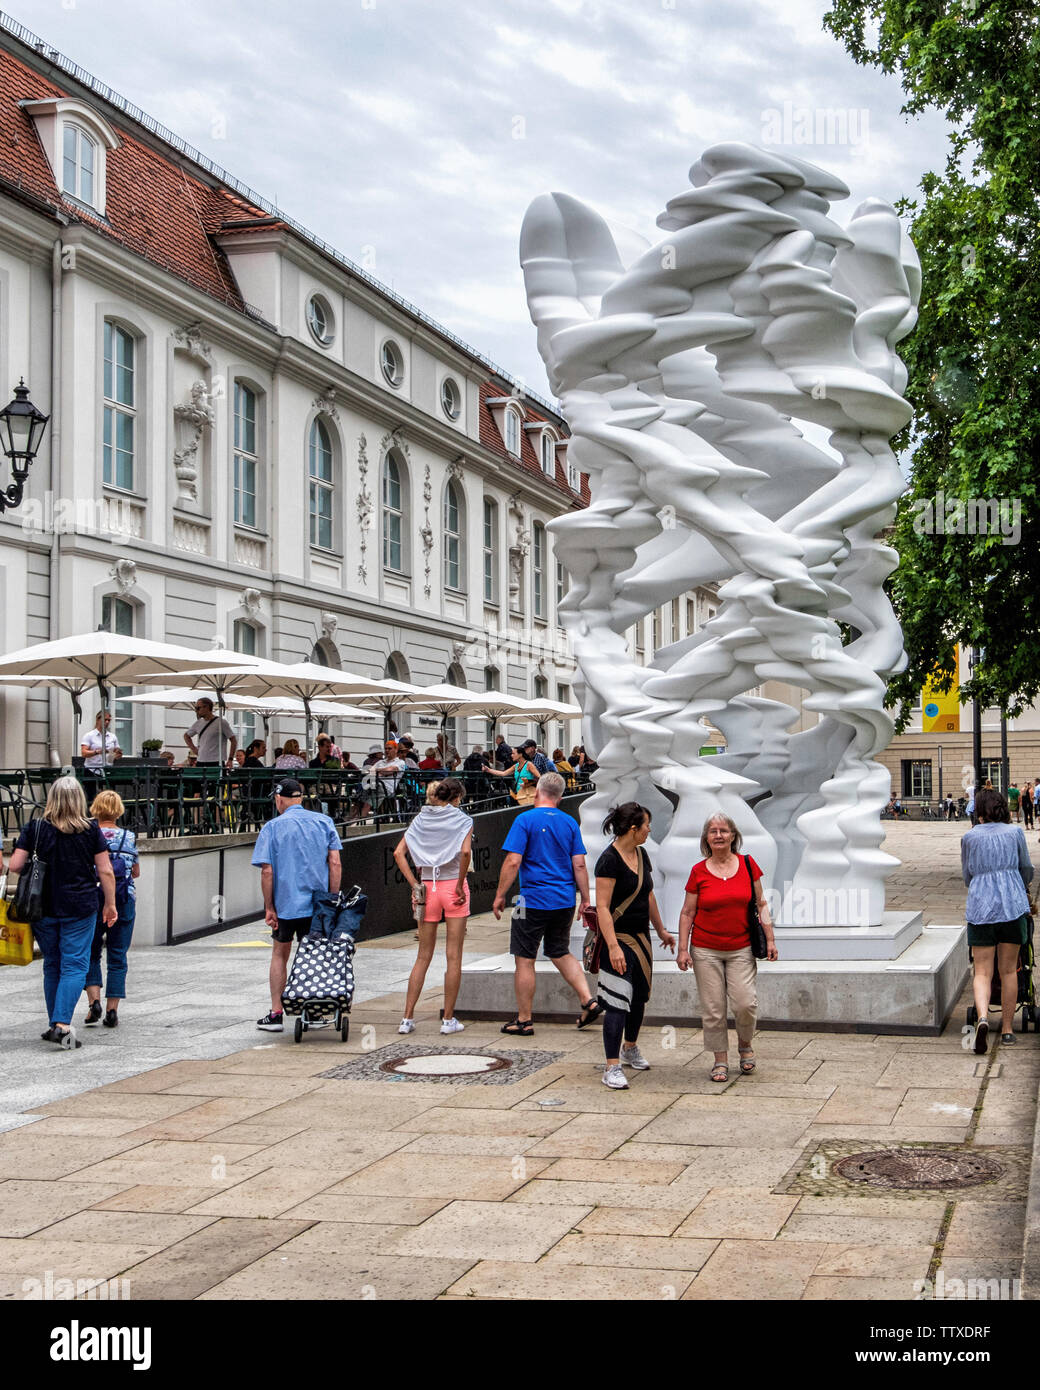 Runner, Fibre Glass sculpture by Sculptor Tony Cragg 2017 outside Palais Populaire Art, Culture & Sports By Deutsche Bank.Gallery, cafe & events venue Stock Photo